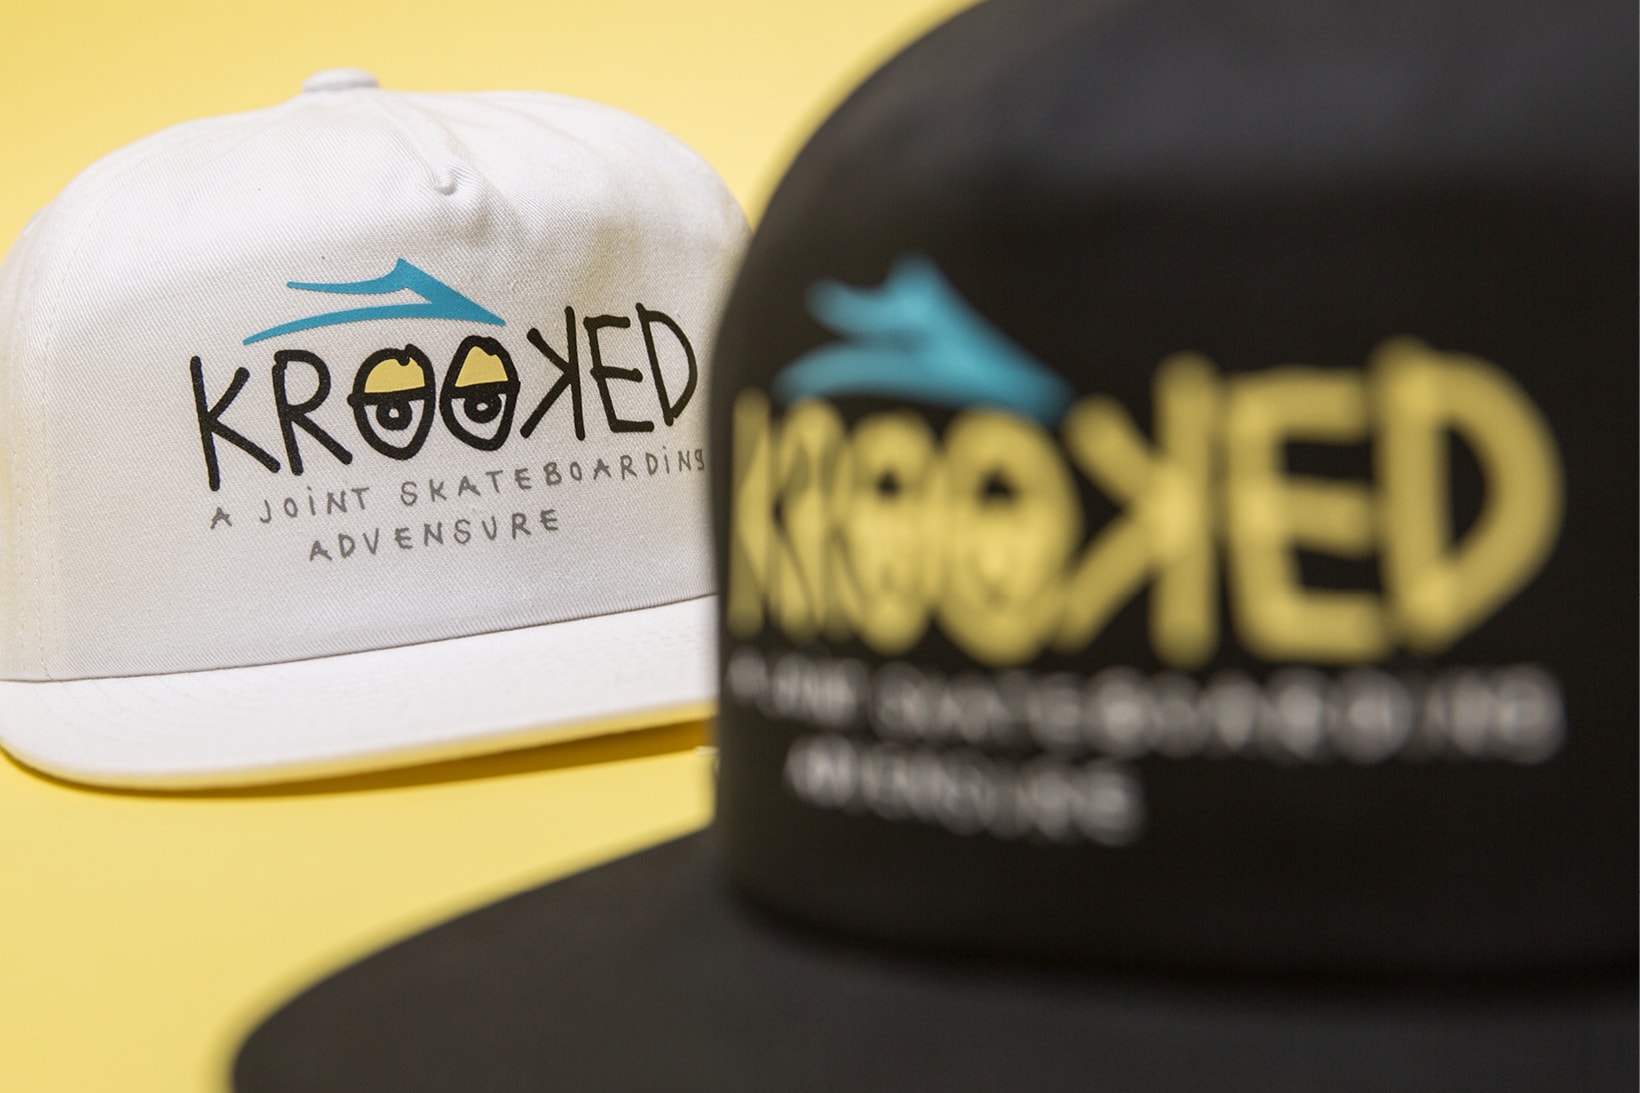 Lakai Limited Footwear x Krooked Skateboards Capsule Collection